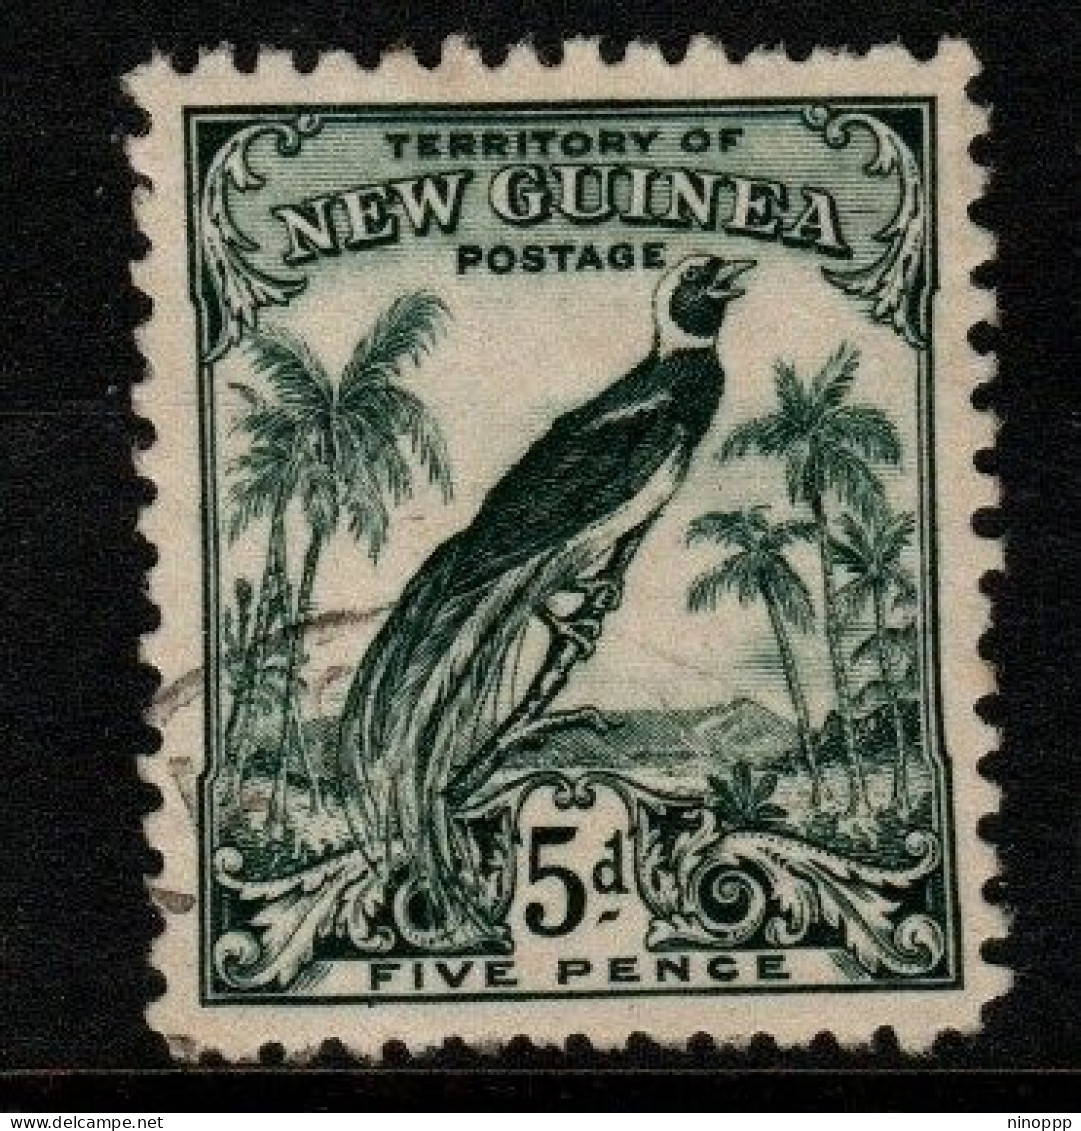 New Guinea SG 182 1931 Raggiana Bird No Date 5d Deep Blur-green Used - Papouasie-Nouvelle-Guinée